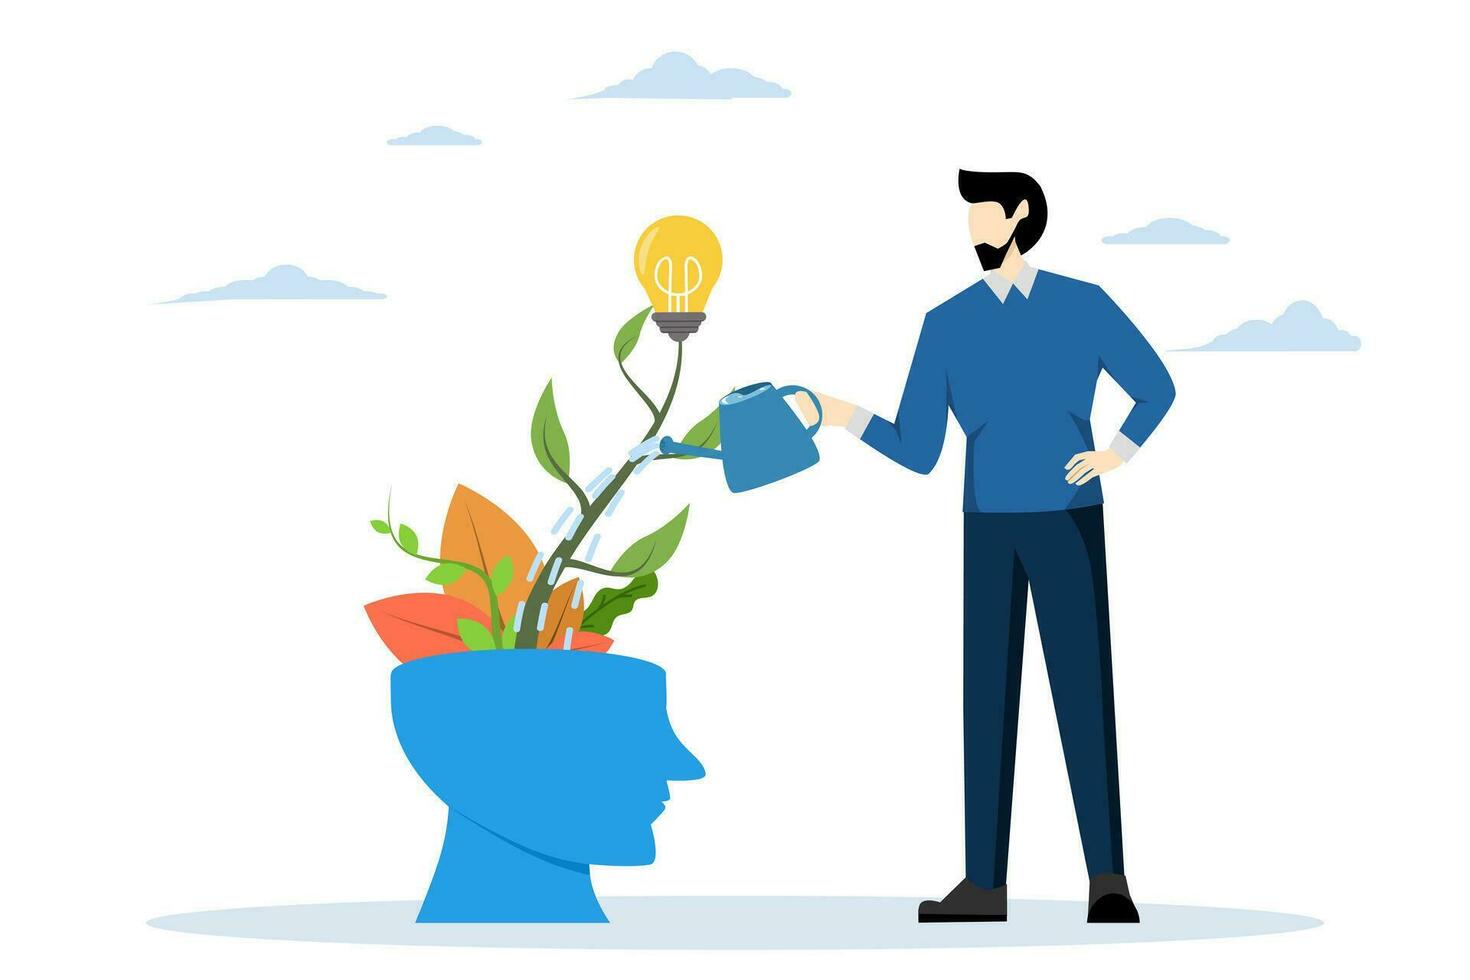 Organize your thoughts. Watering plants with a big head human mindset a growth mindset is different from a fixed mindset. dropping water on open head. Business Mindset. Flat character illustration vector